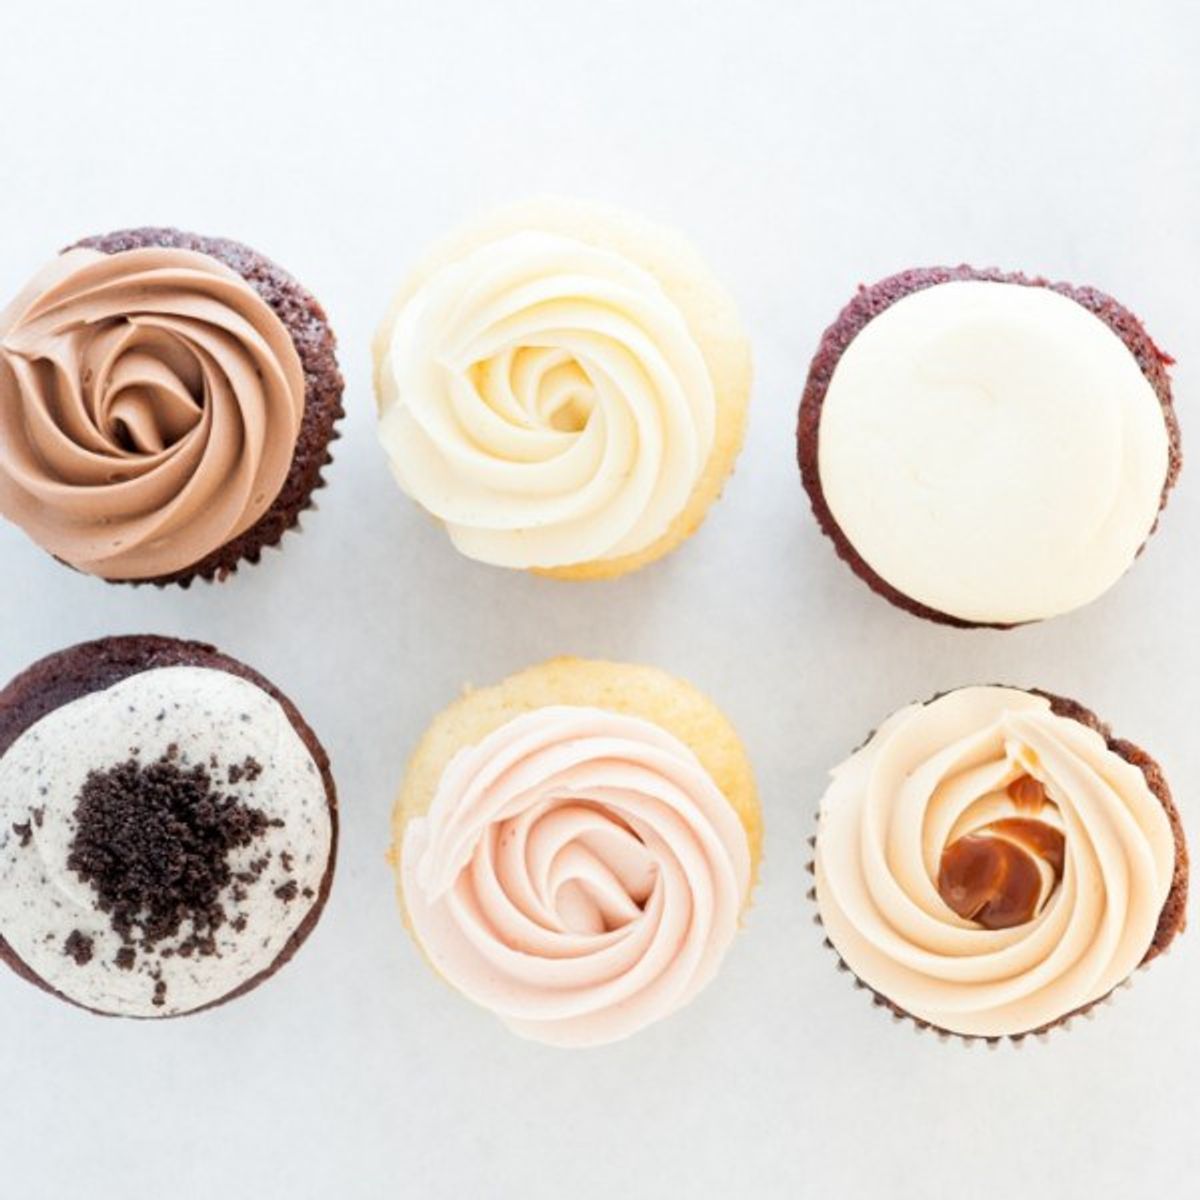 15 Deliciously-Amazing Cupcakes You Need To Make